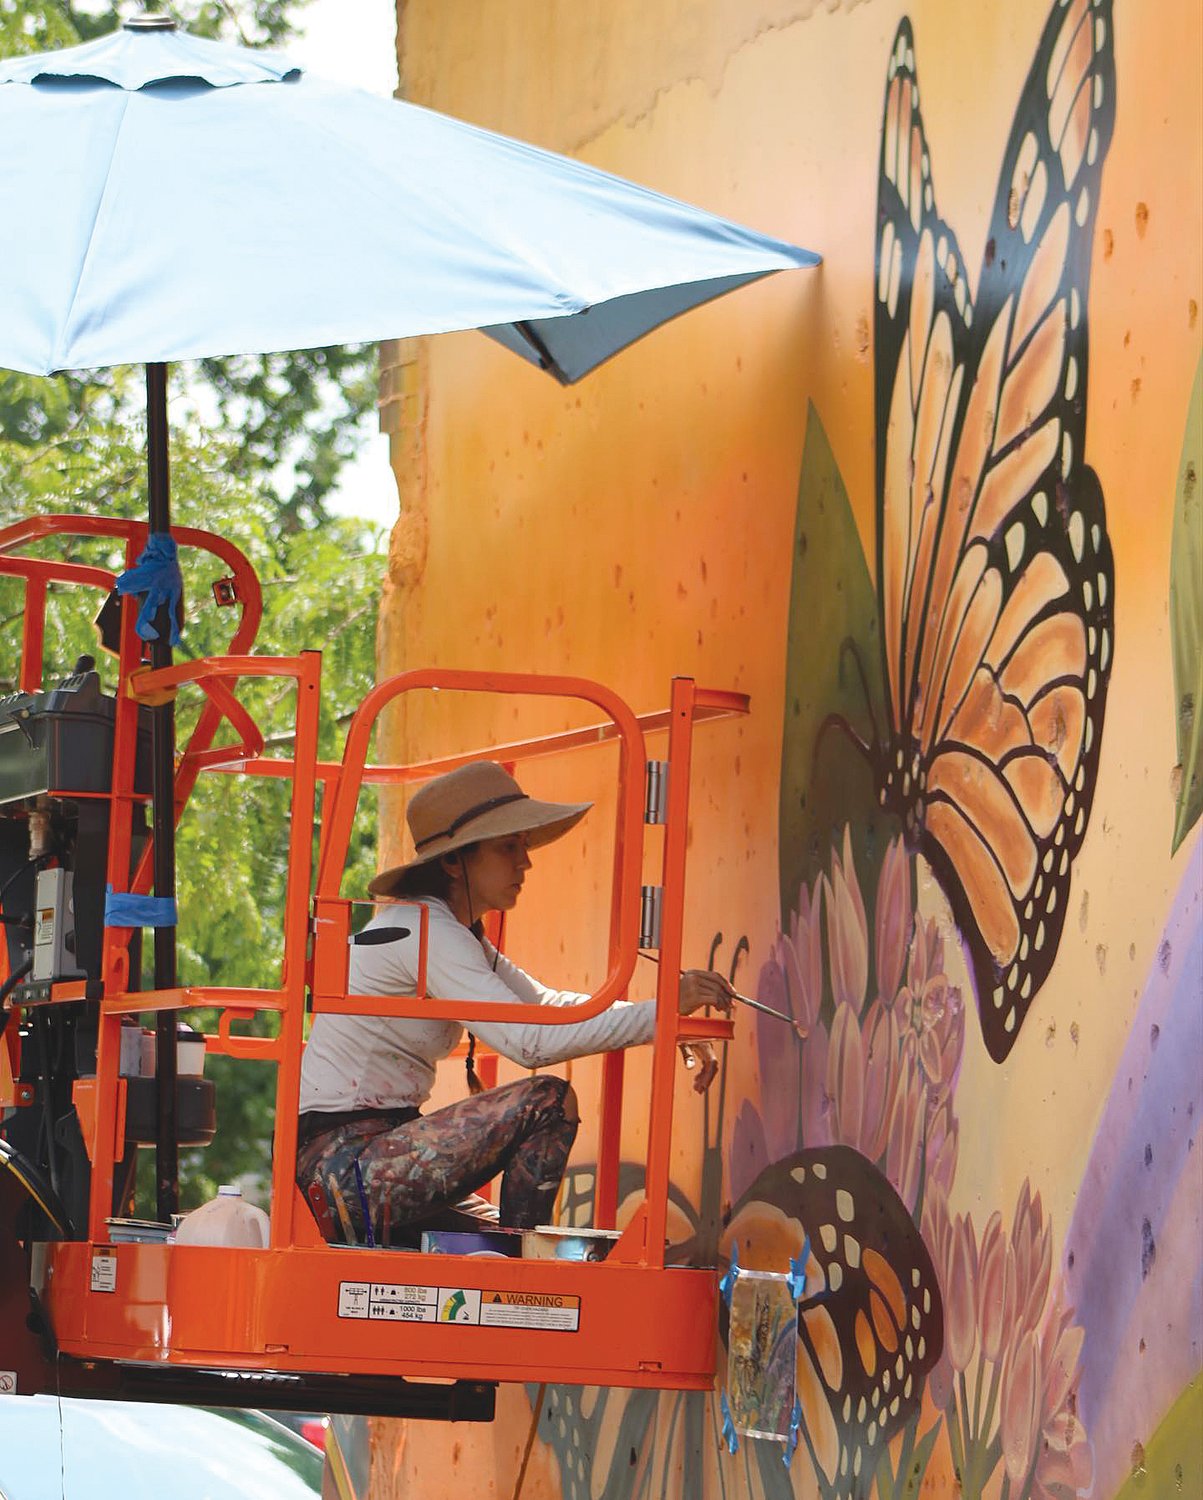 An artist works on the mural in Covington.